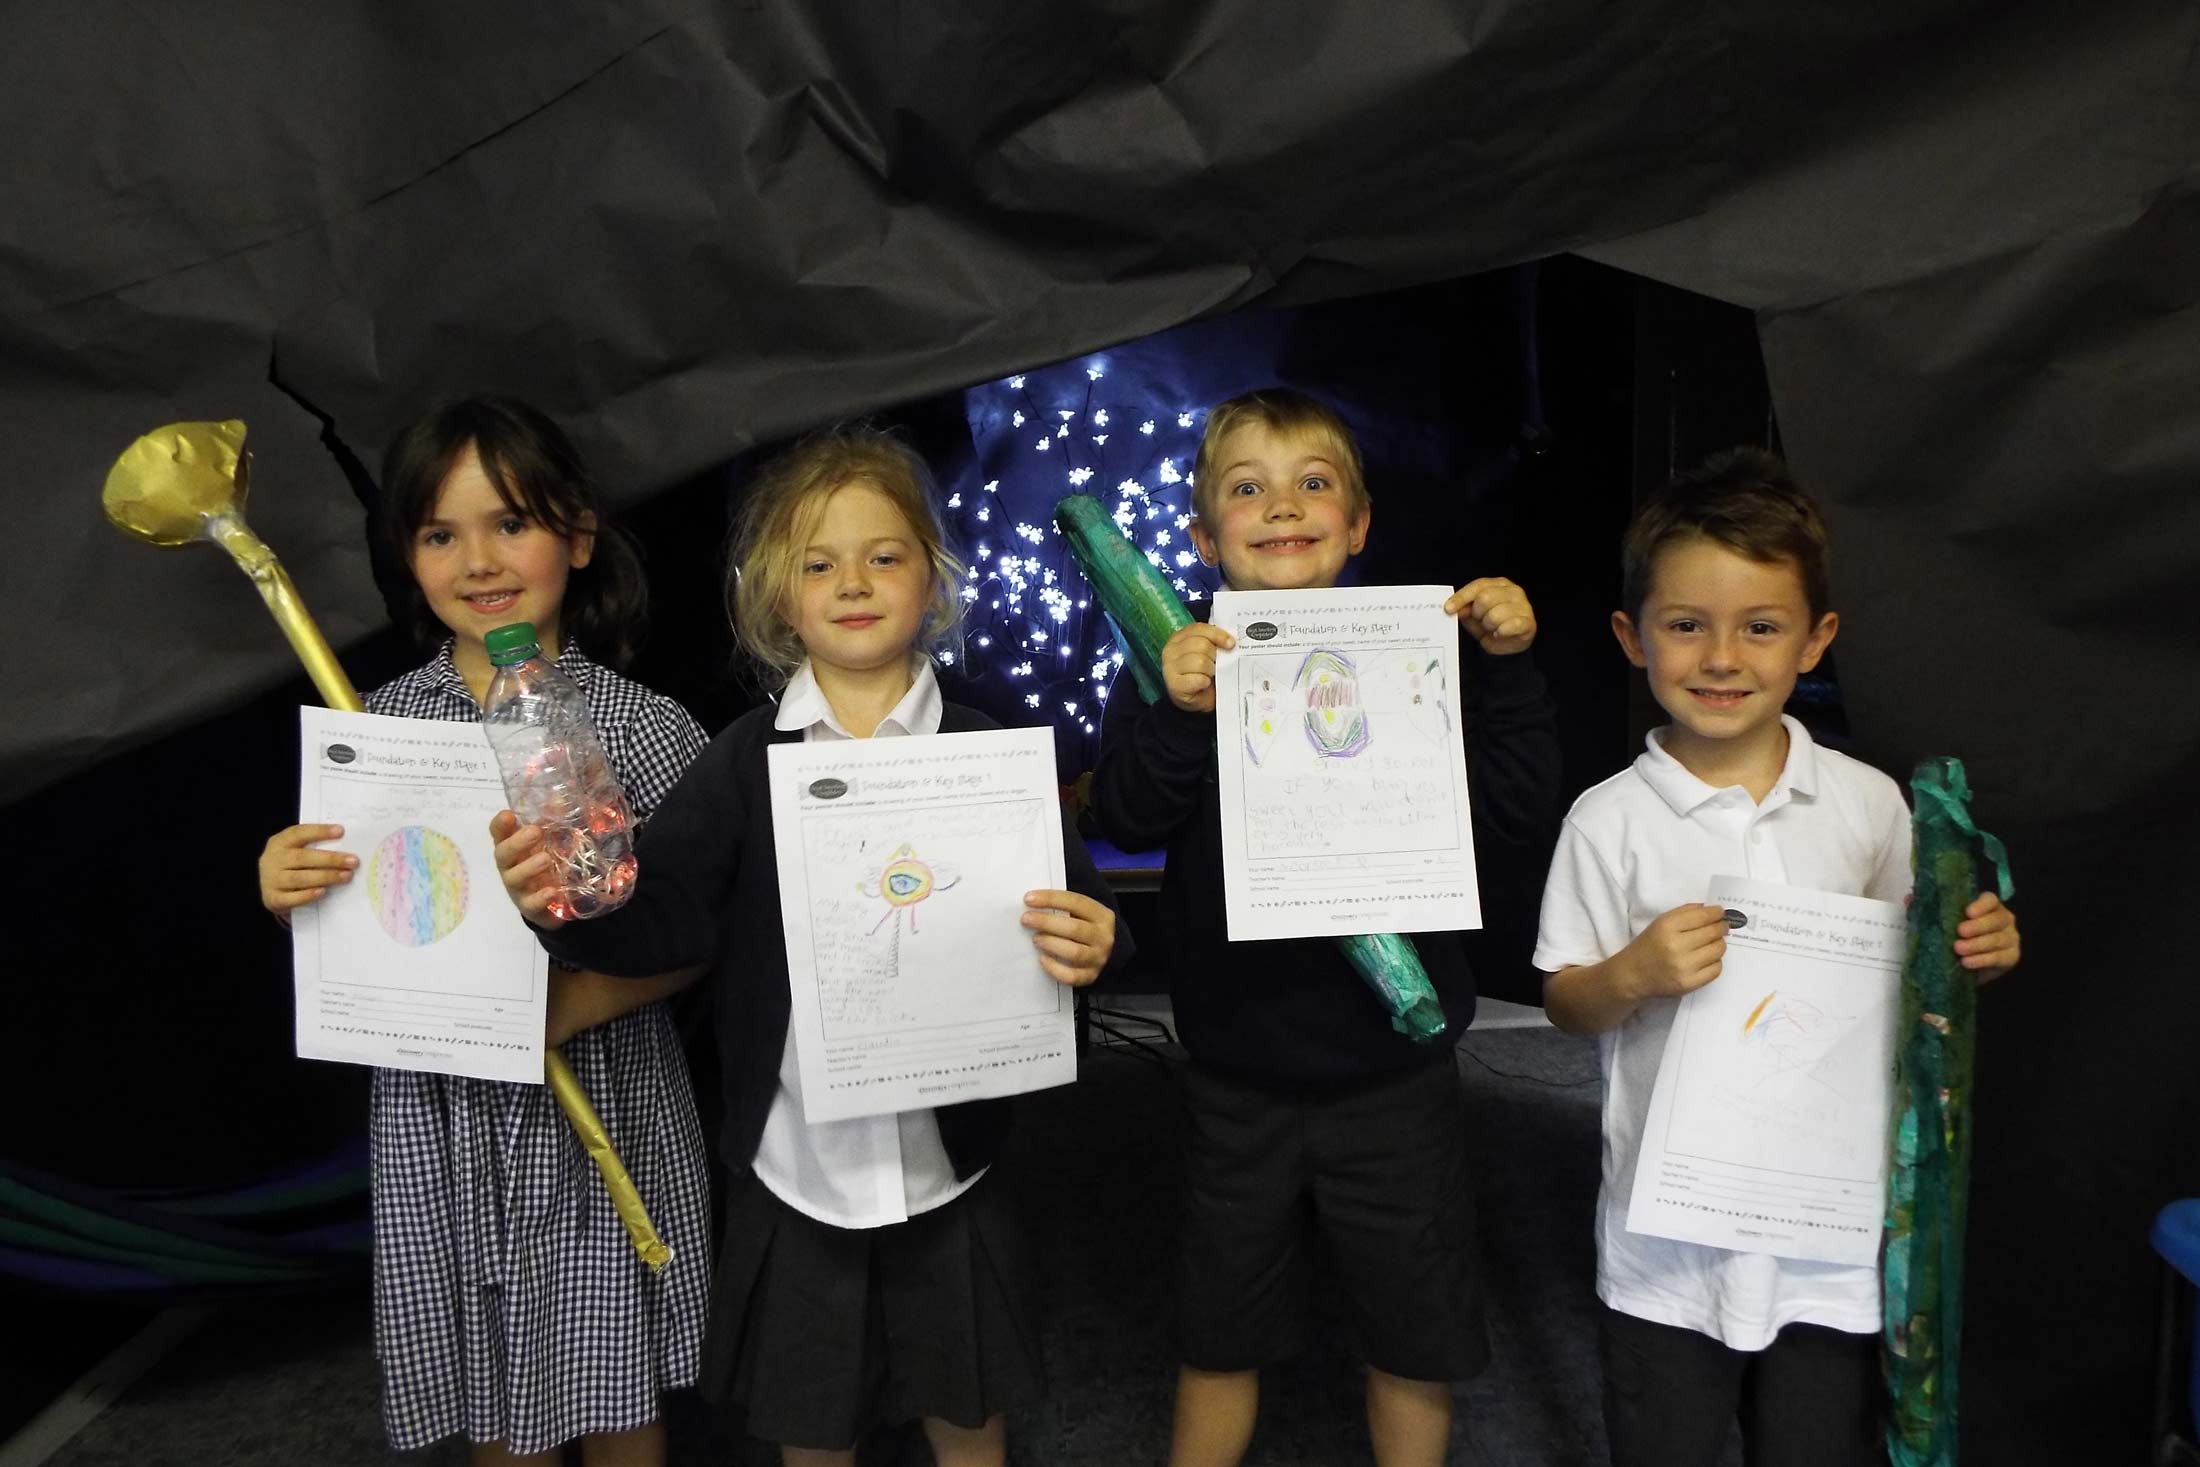 Children at Hampsthwaite CE Primary School started the new school term with a week of Dahl-themed celebrations